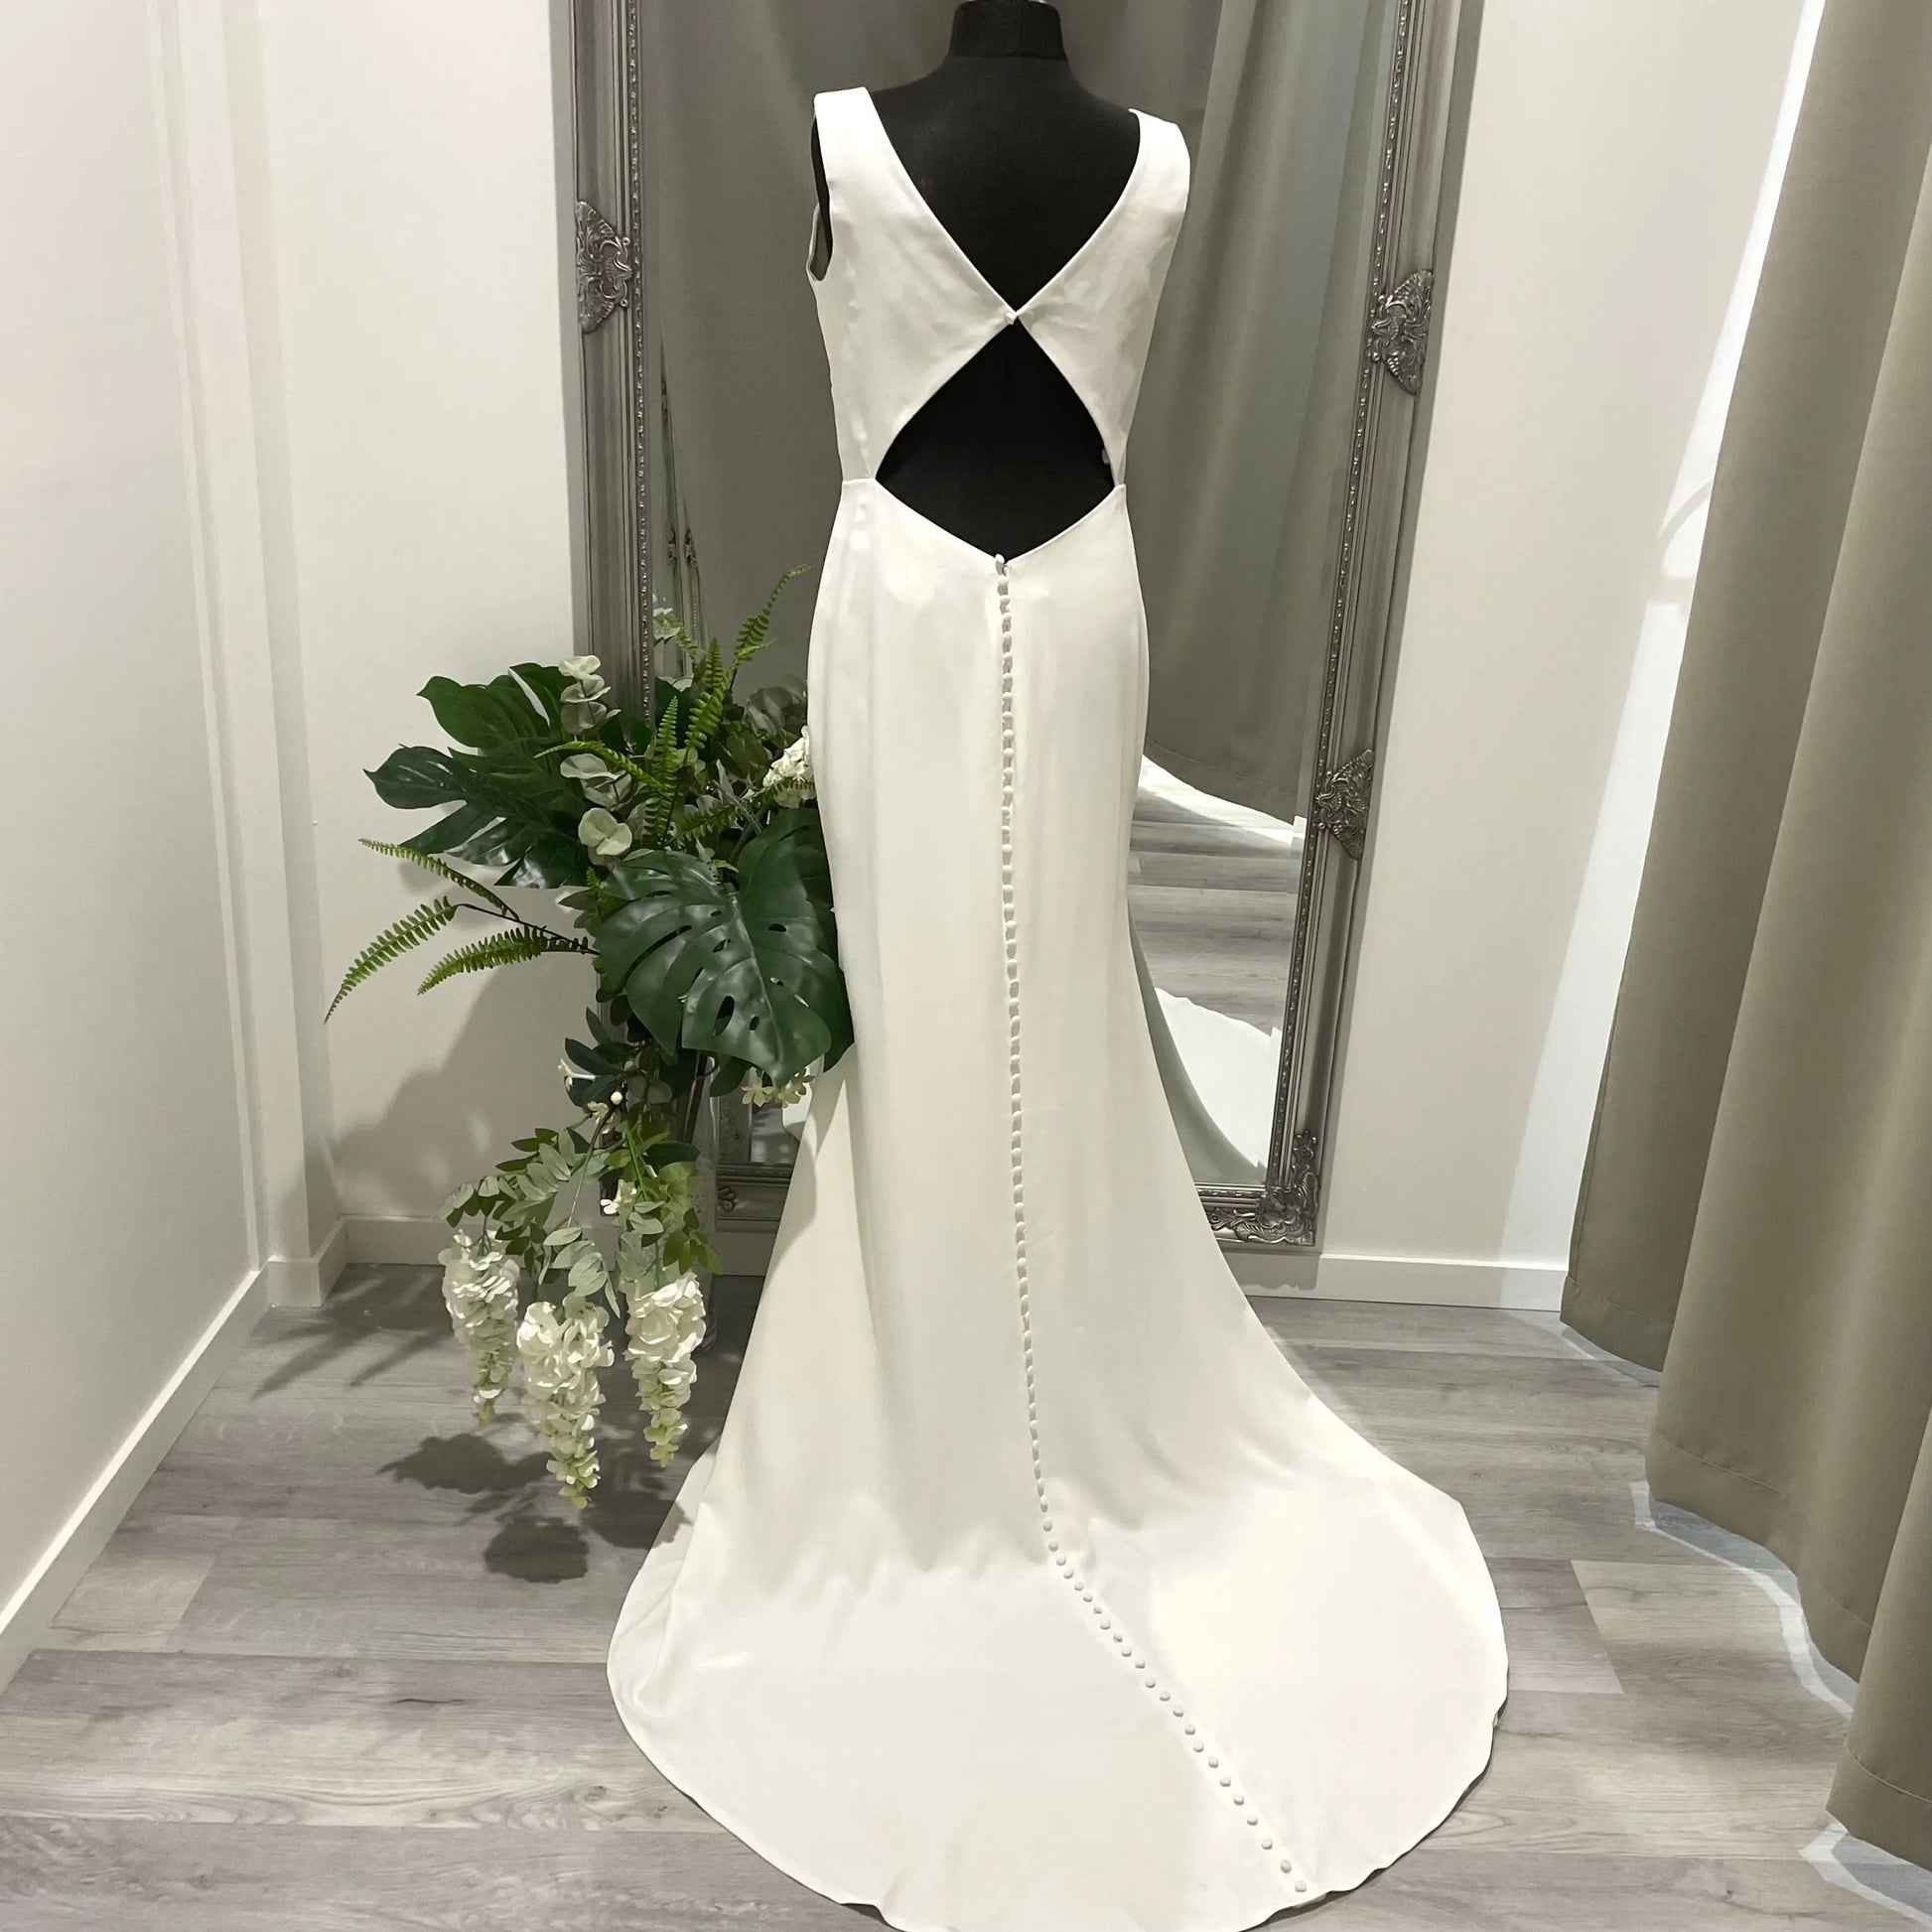 Back view of the Penny Wedding Gown showcasing the intricate diamond cutout at the waist, V-neckline, and buttons running down to the chapel train. This elegant and sophisticated detail adds a touch of glamour to the beautiful bridal dress.